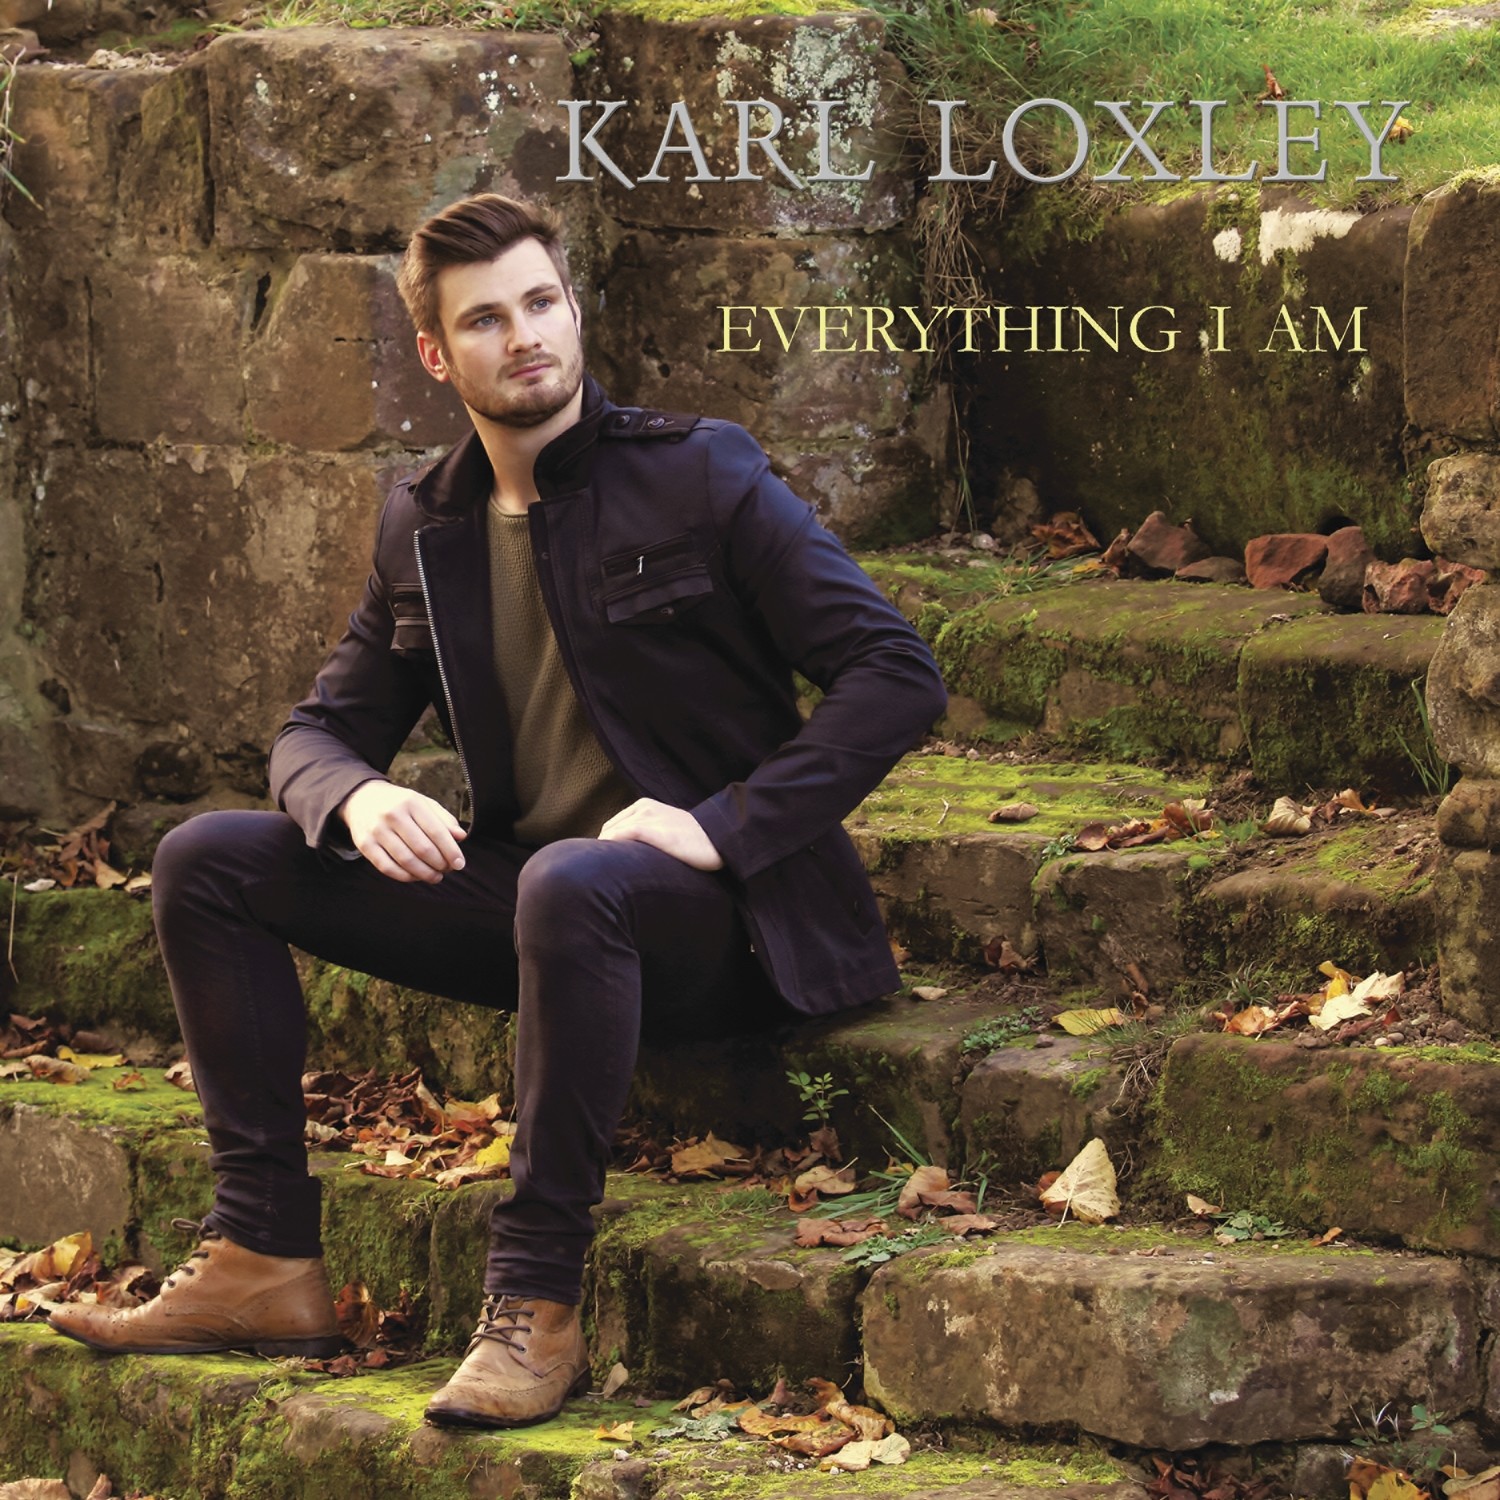 Karl Loxley 'Everything I Am' CD